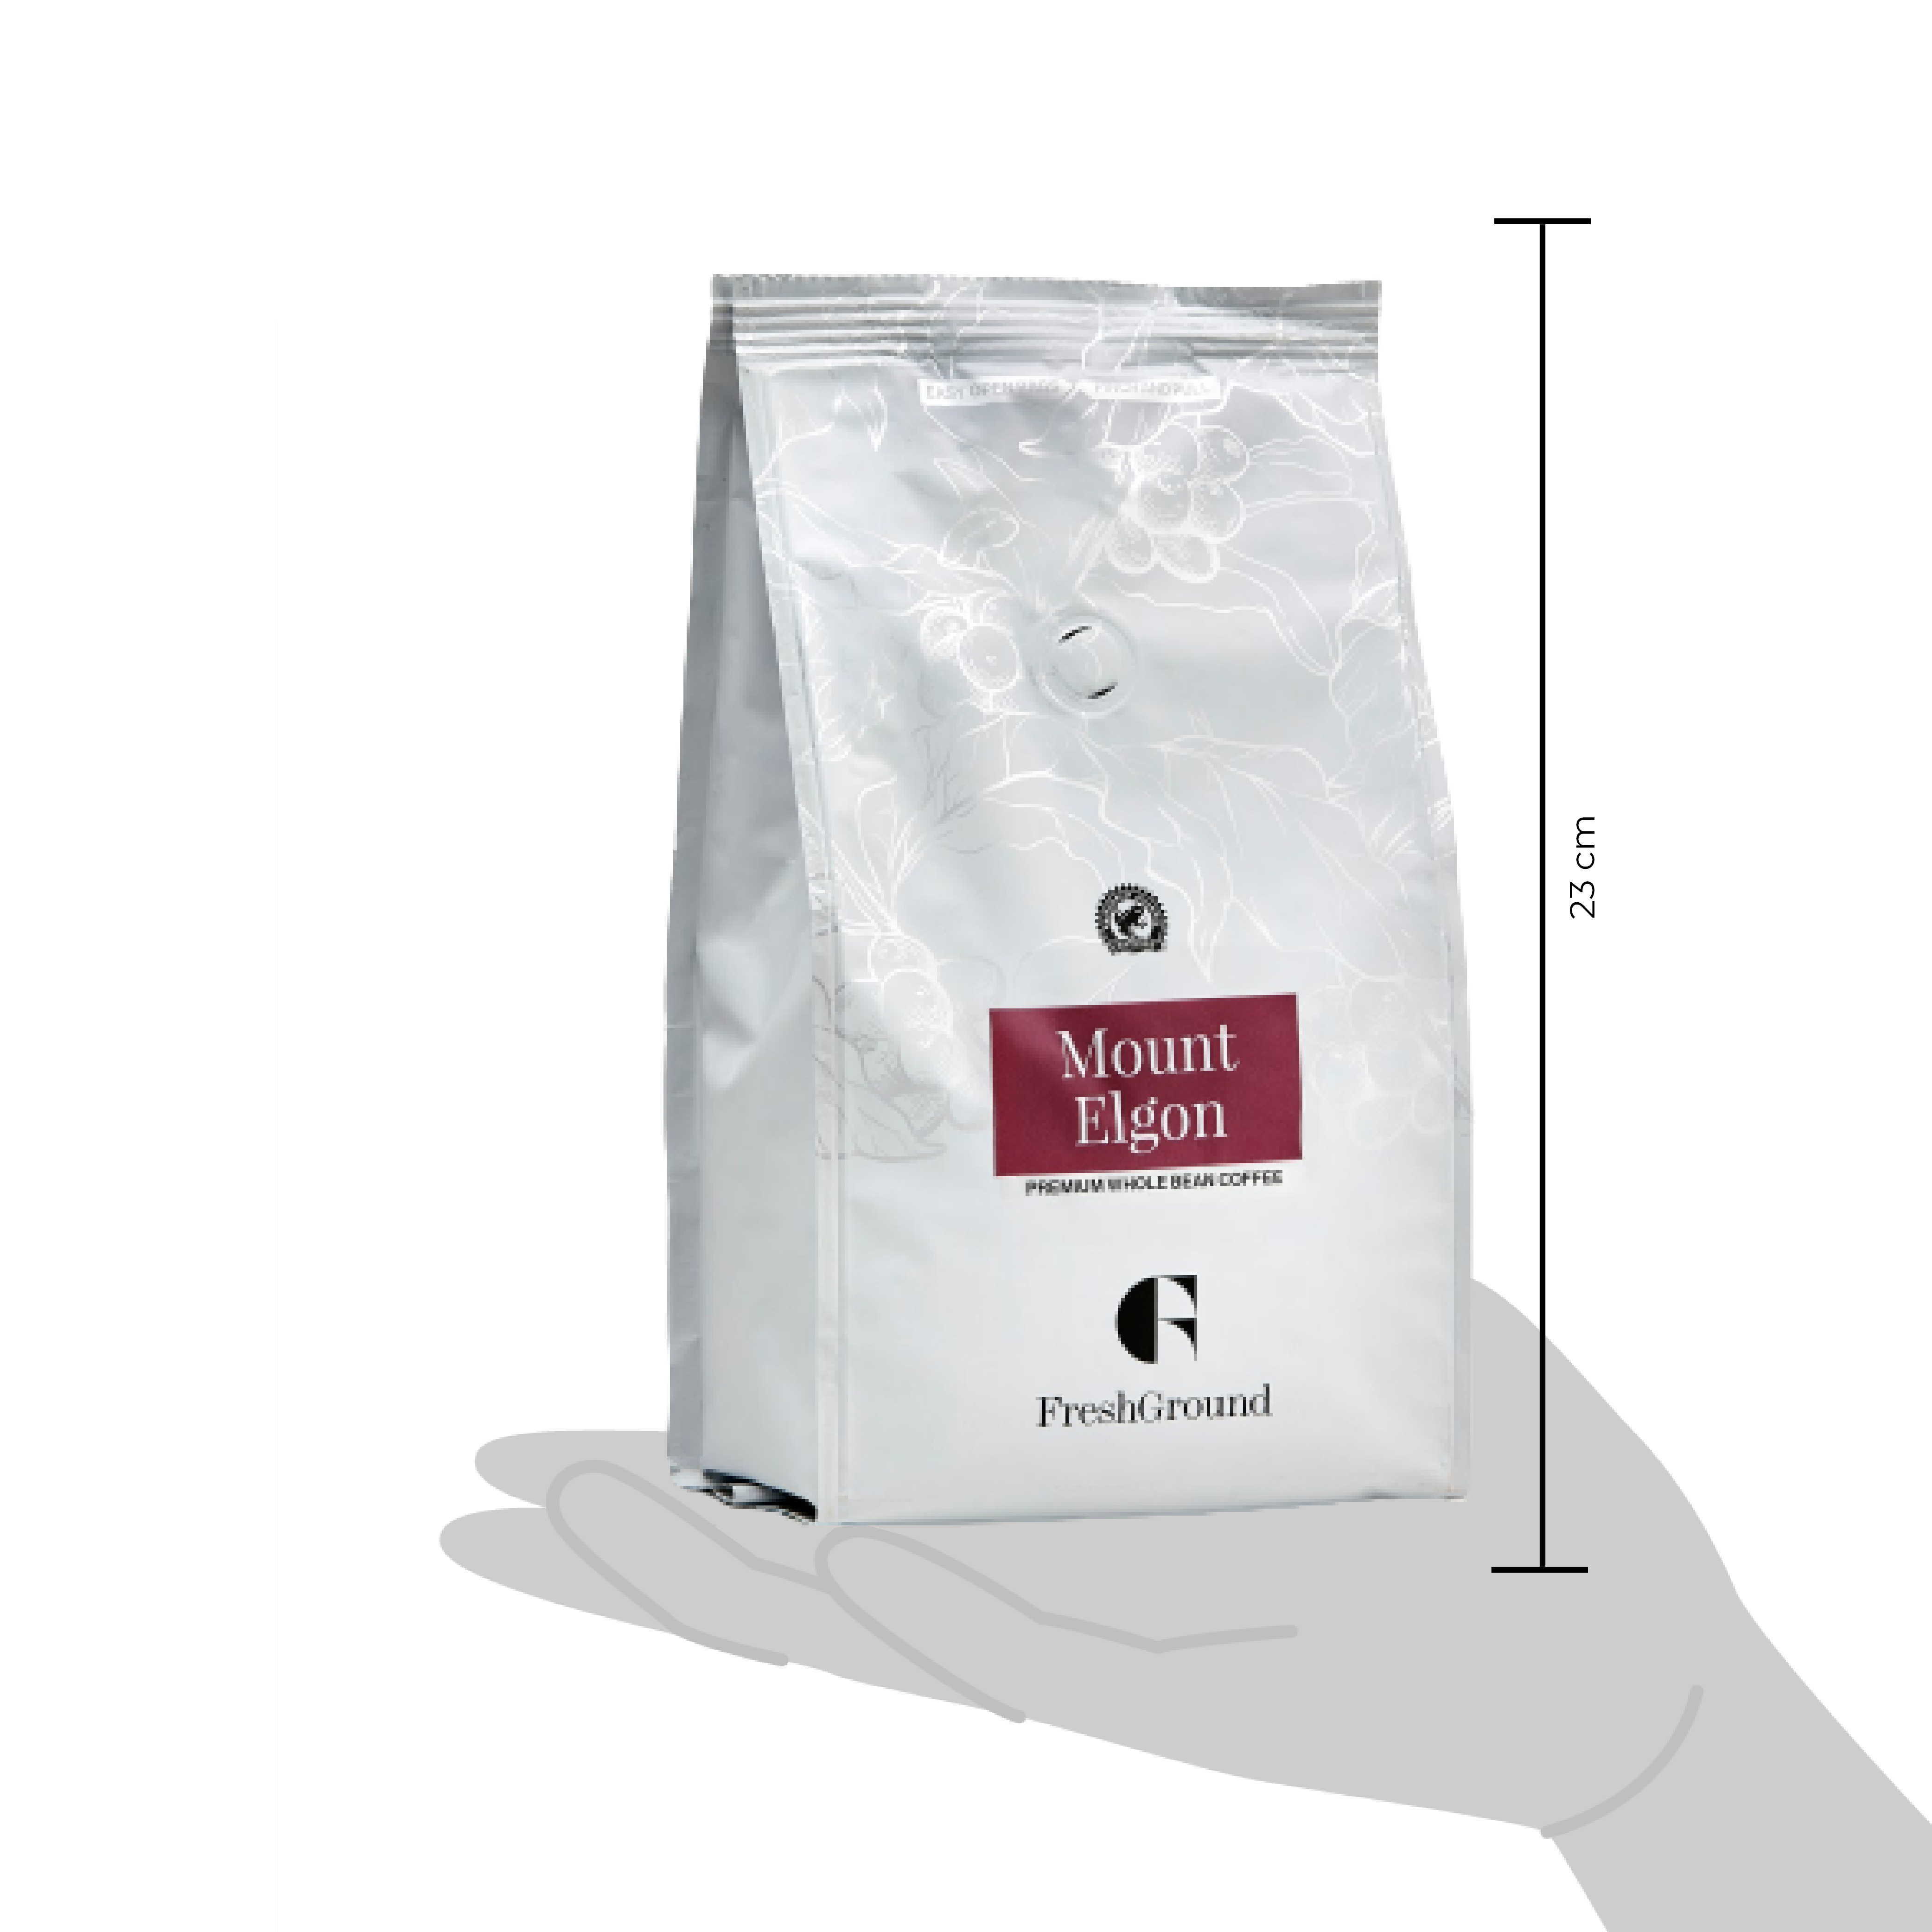 Scale image of Mount Elgon coffee